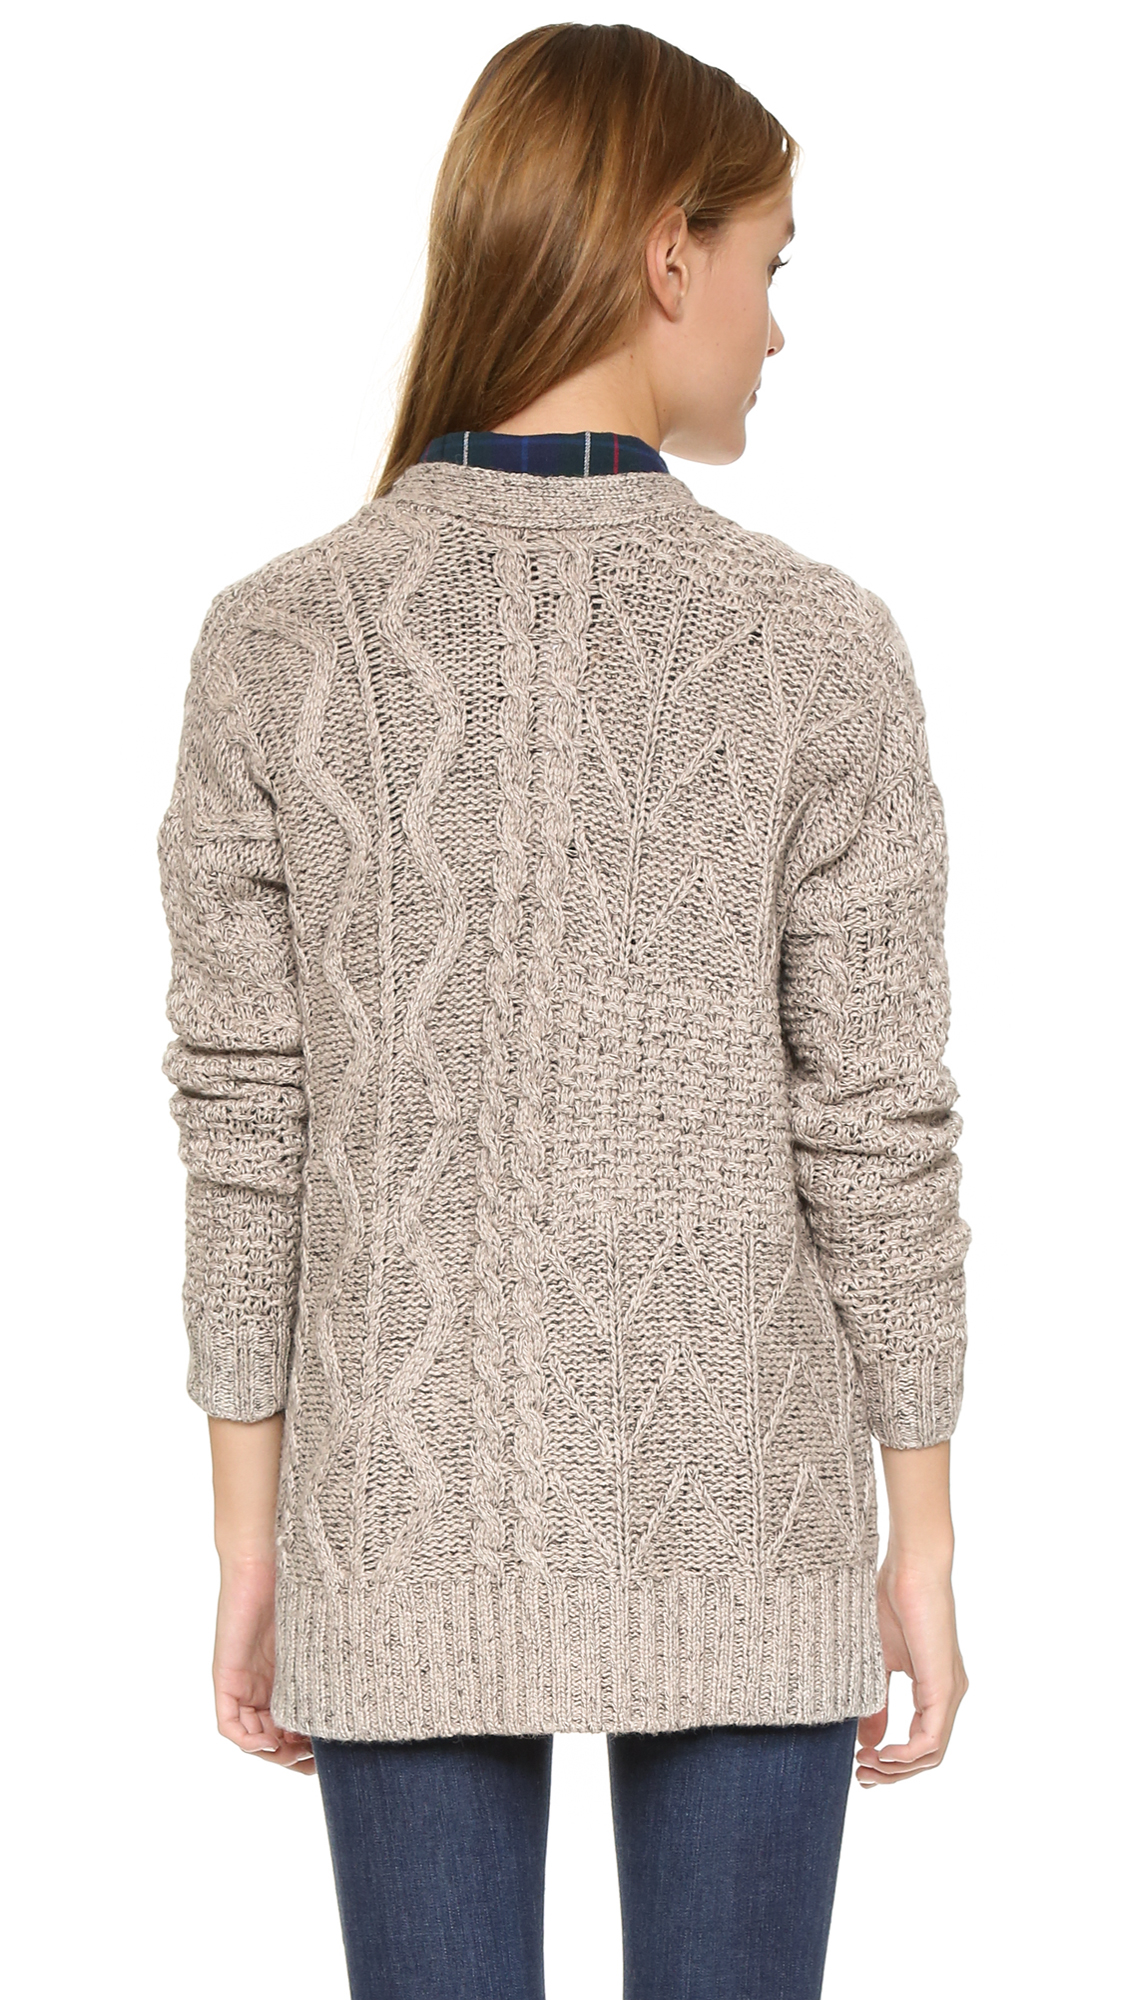 Lyst - Madewell Marled Patchwork Cable Cardigan in Gray